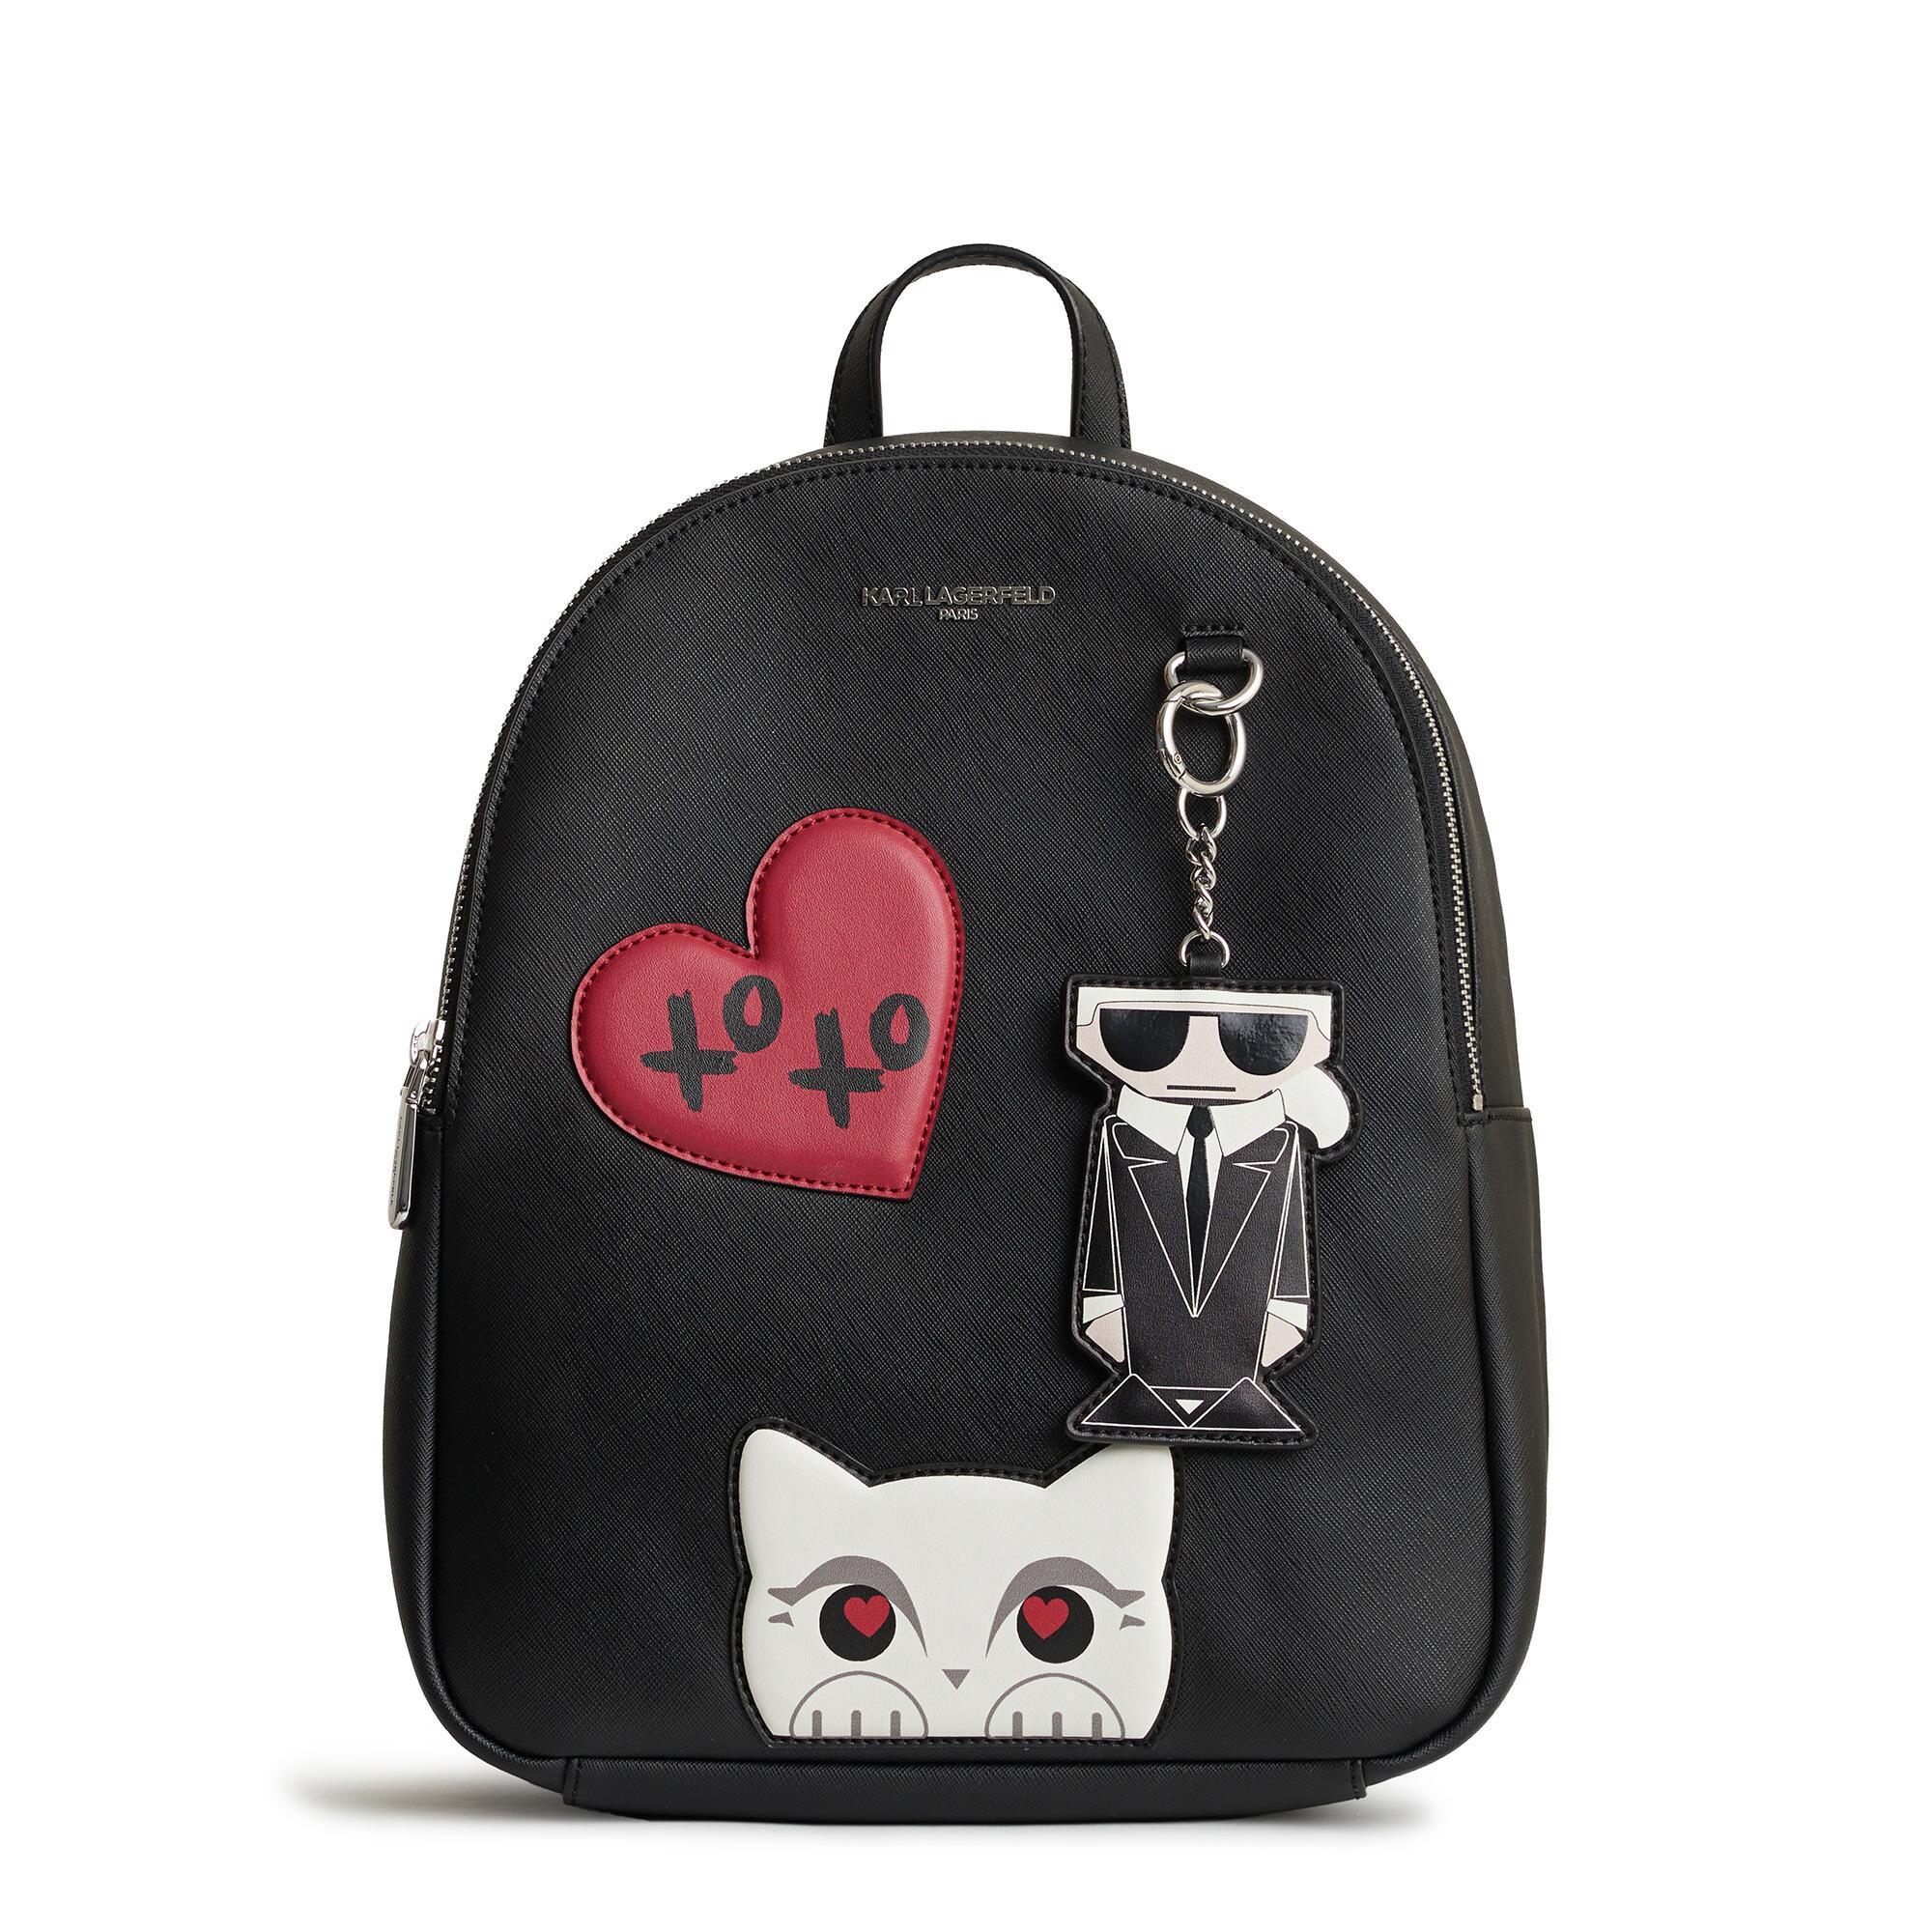 Karl Lagerfeld Adele Patch Backpack in Black | Lyst